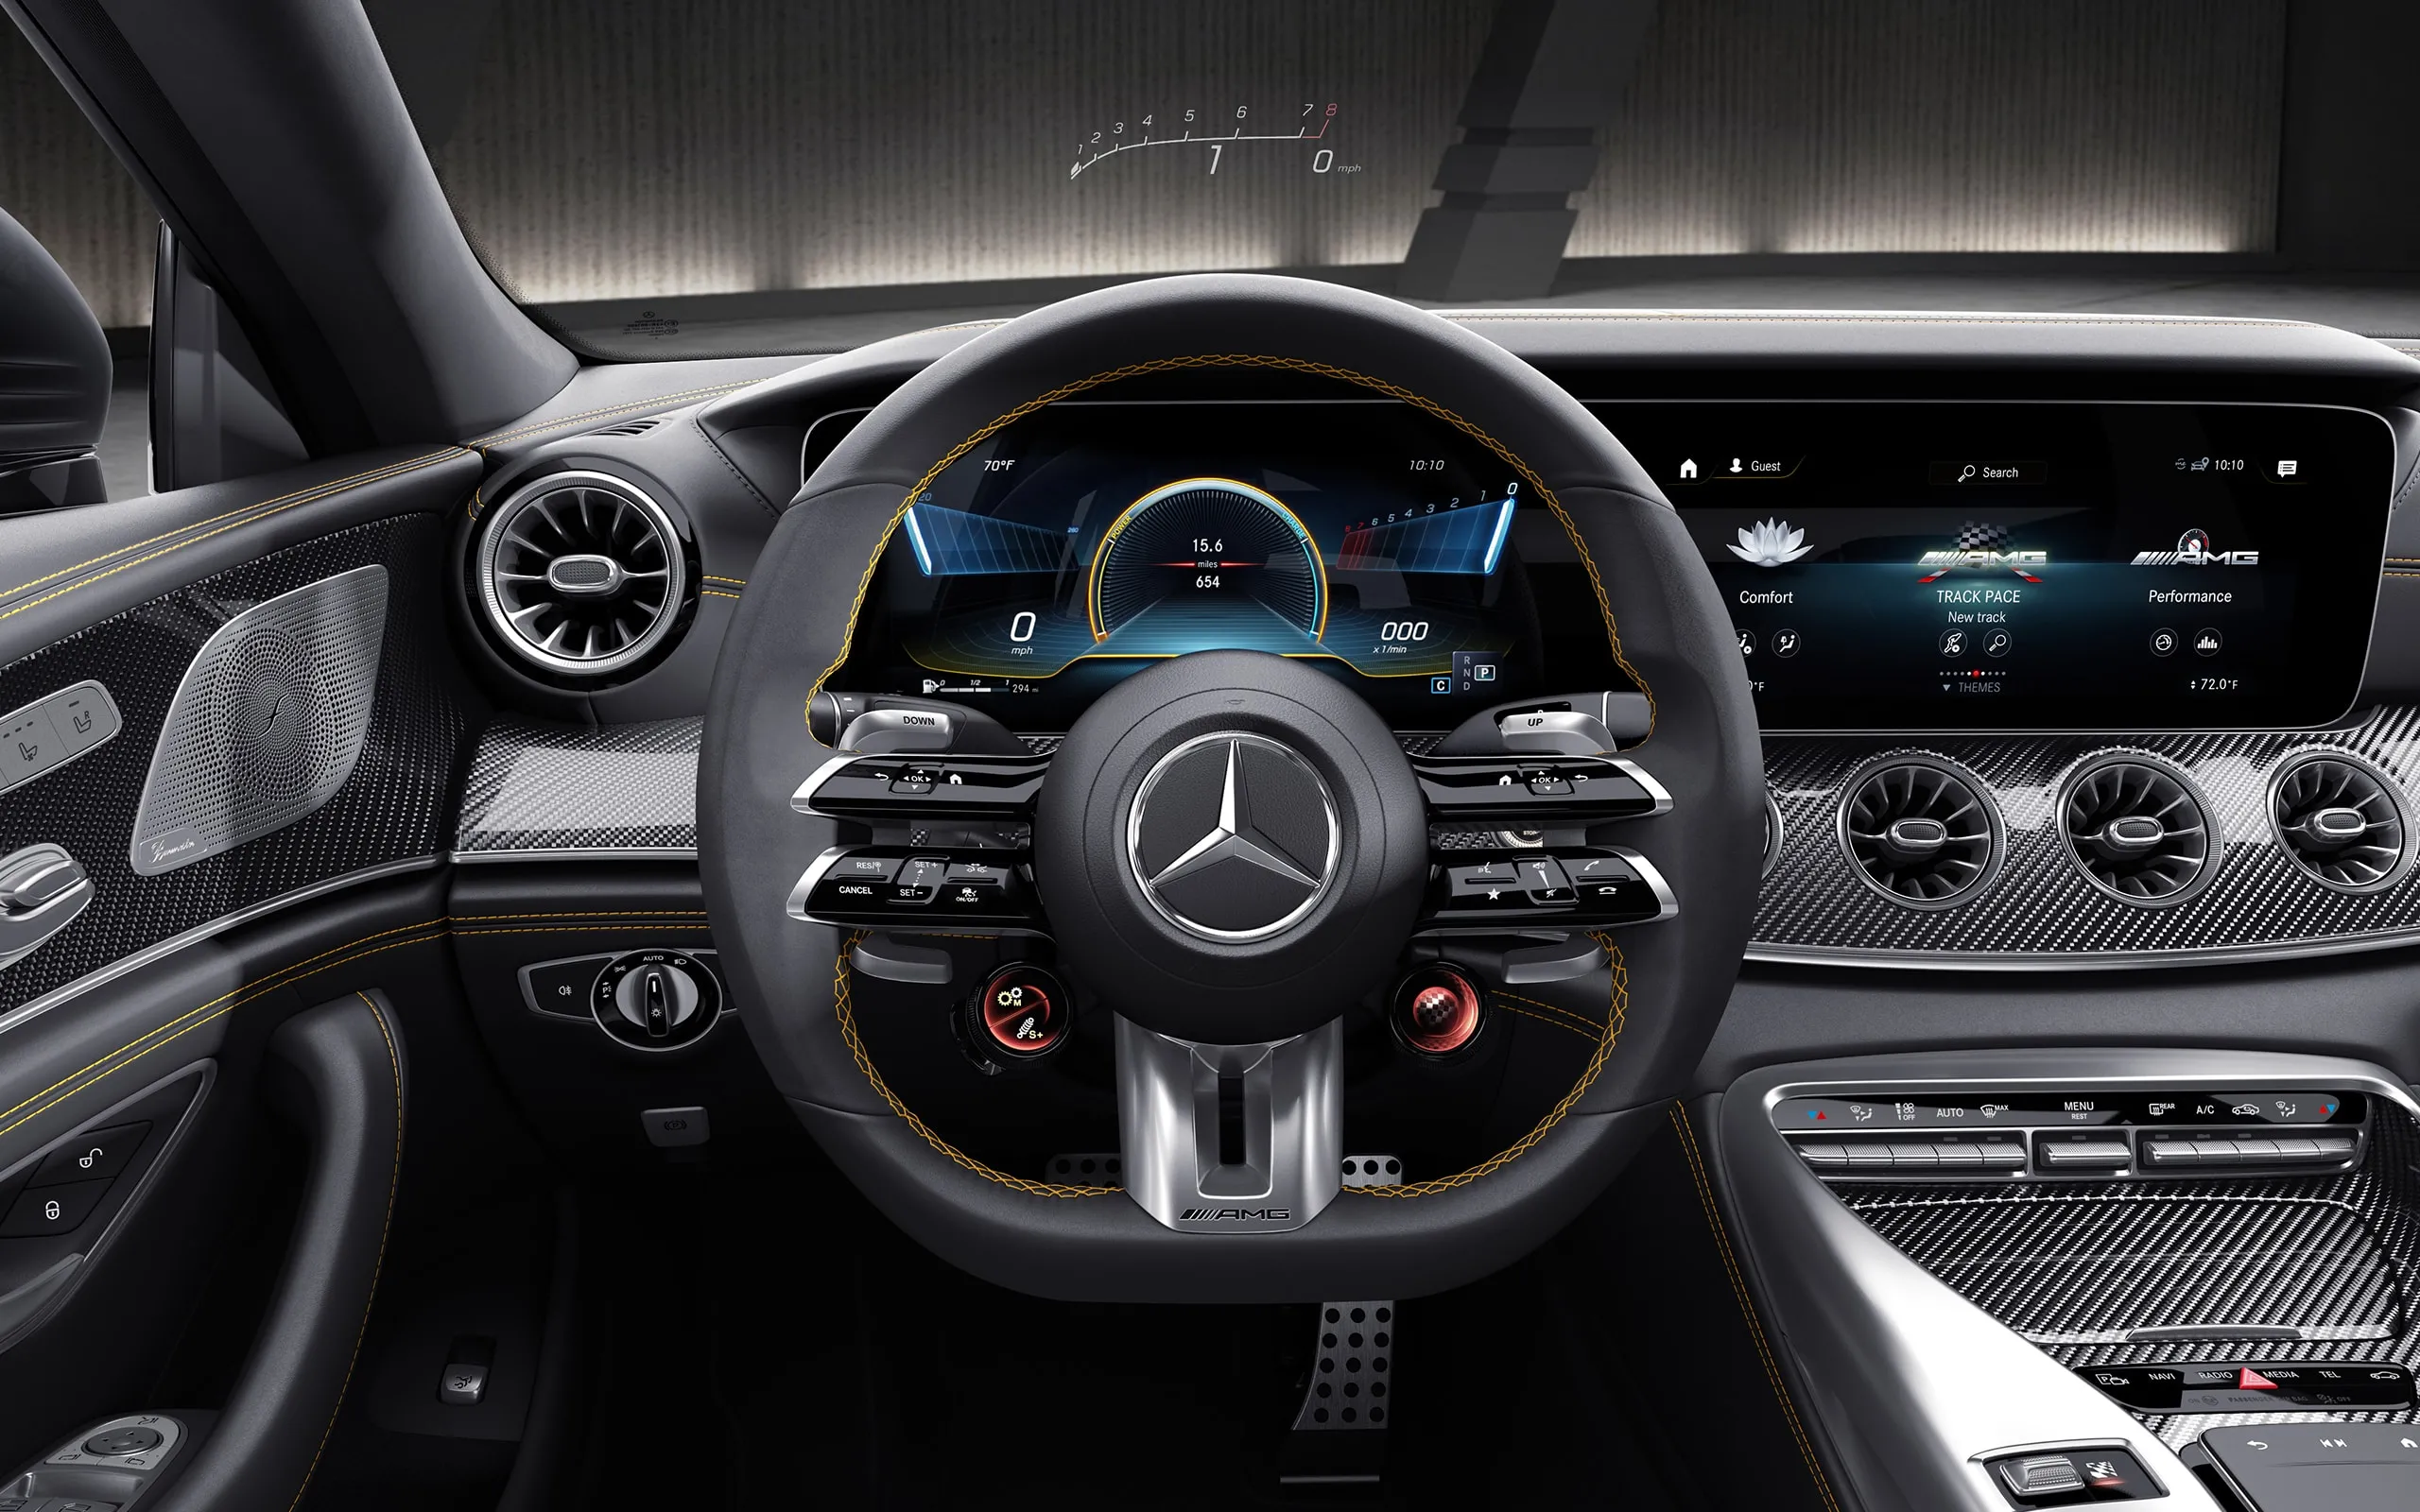 The Mercedes-Benz AMG GT 4-Door Coupe – A BENZ IN THE ROAD